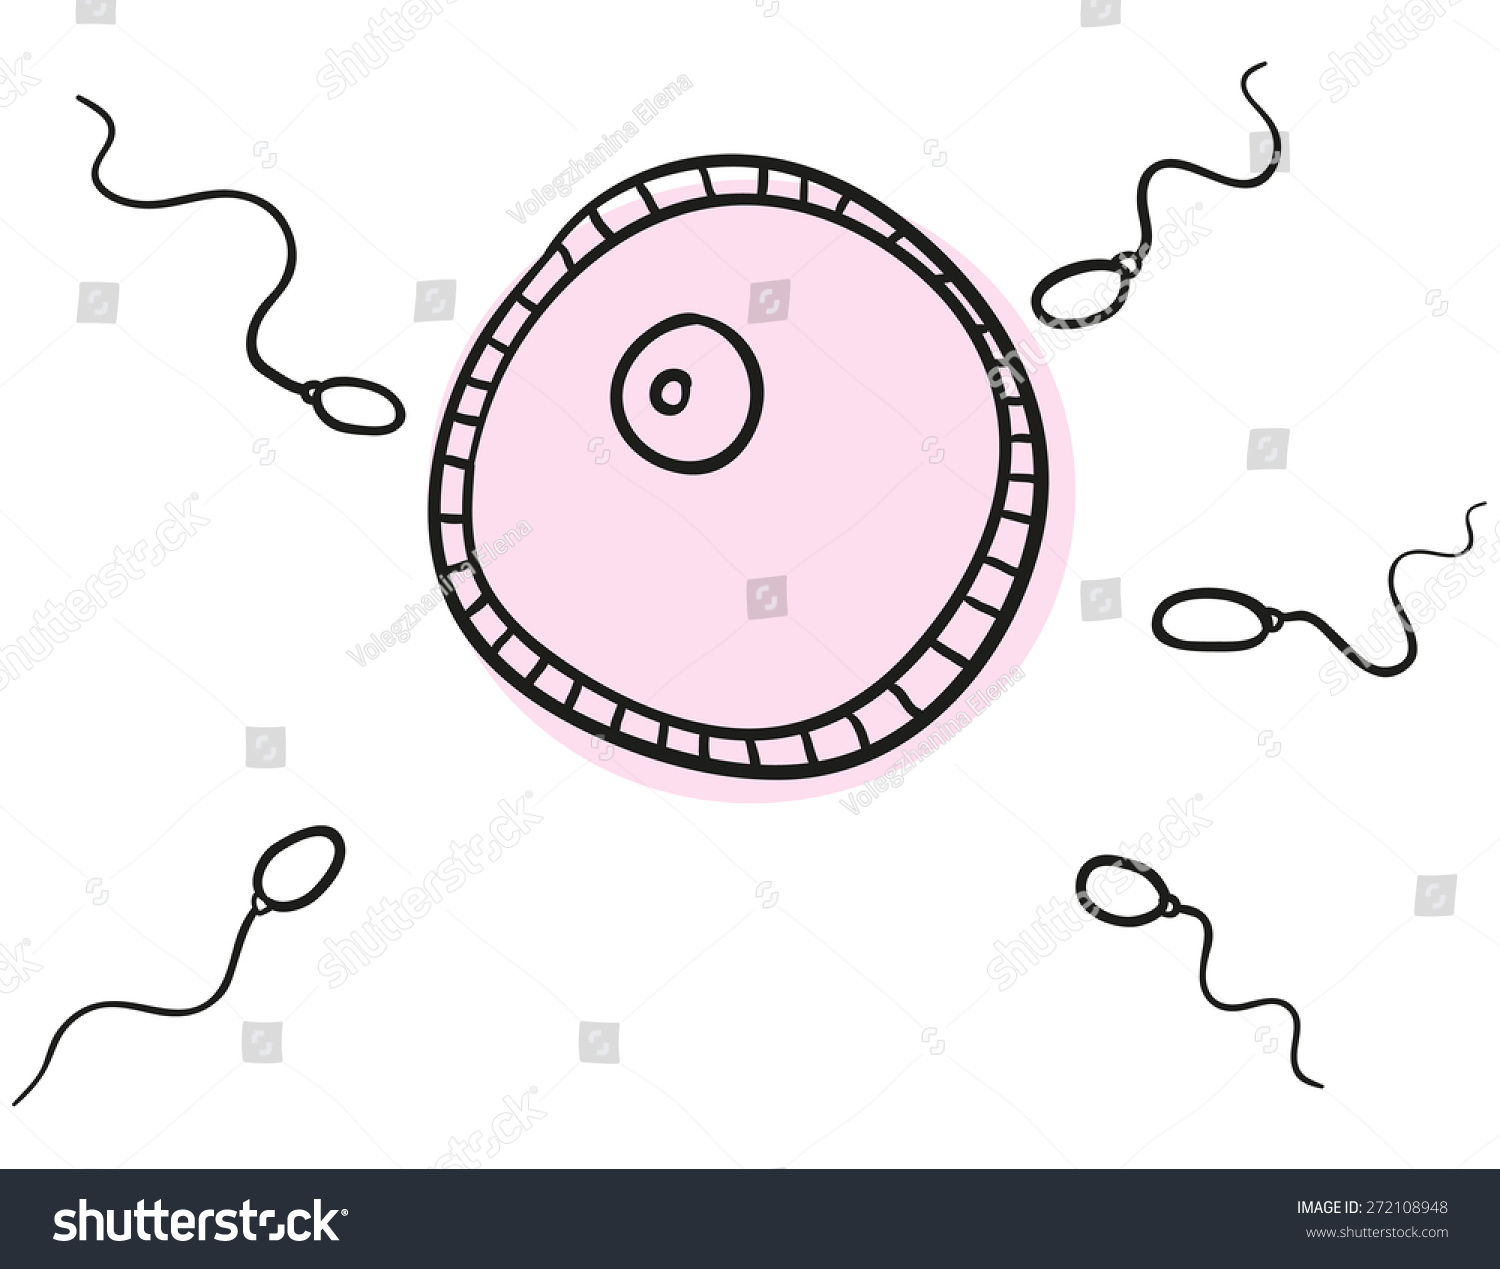 human cell clipart - photo #32